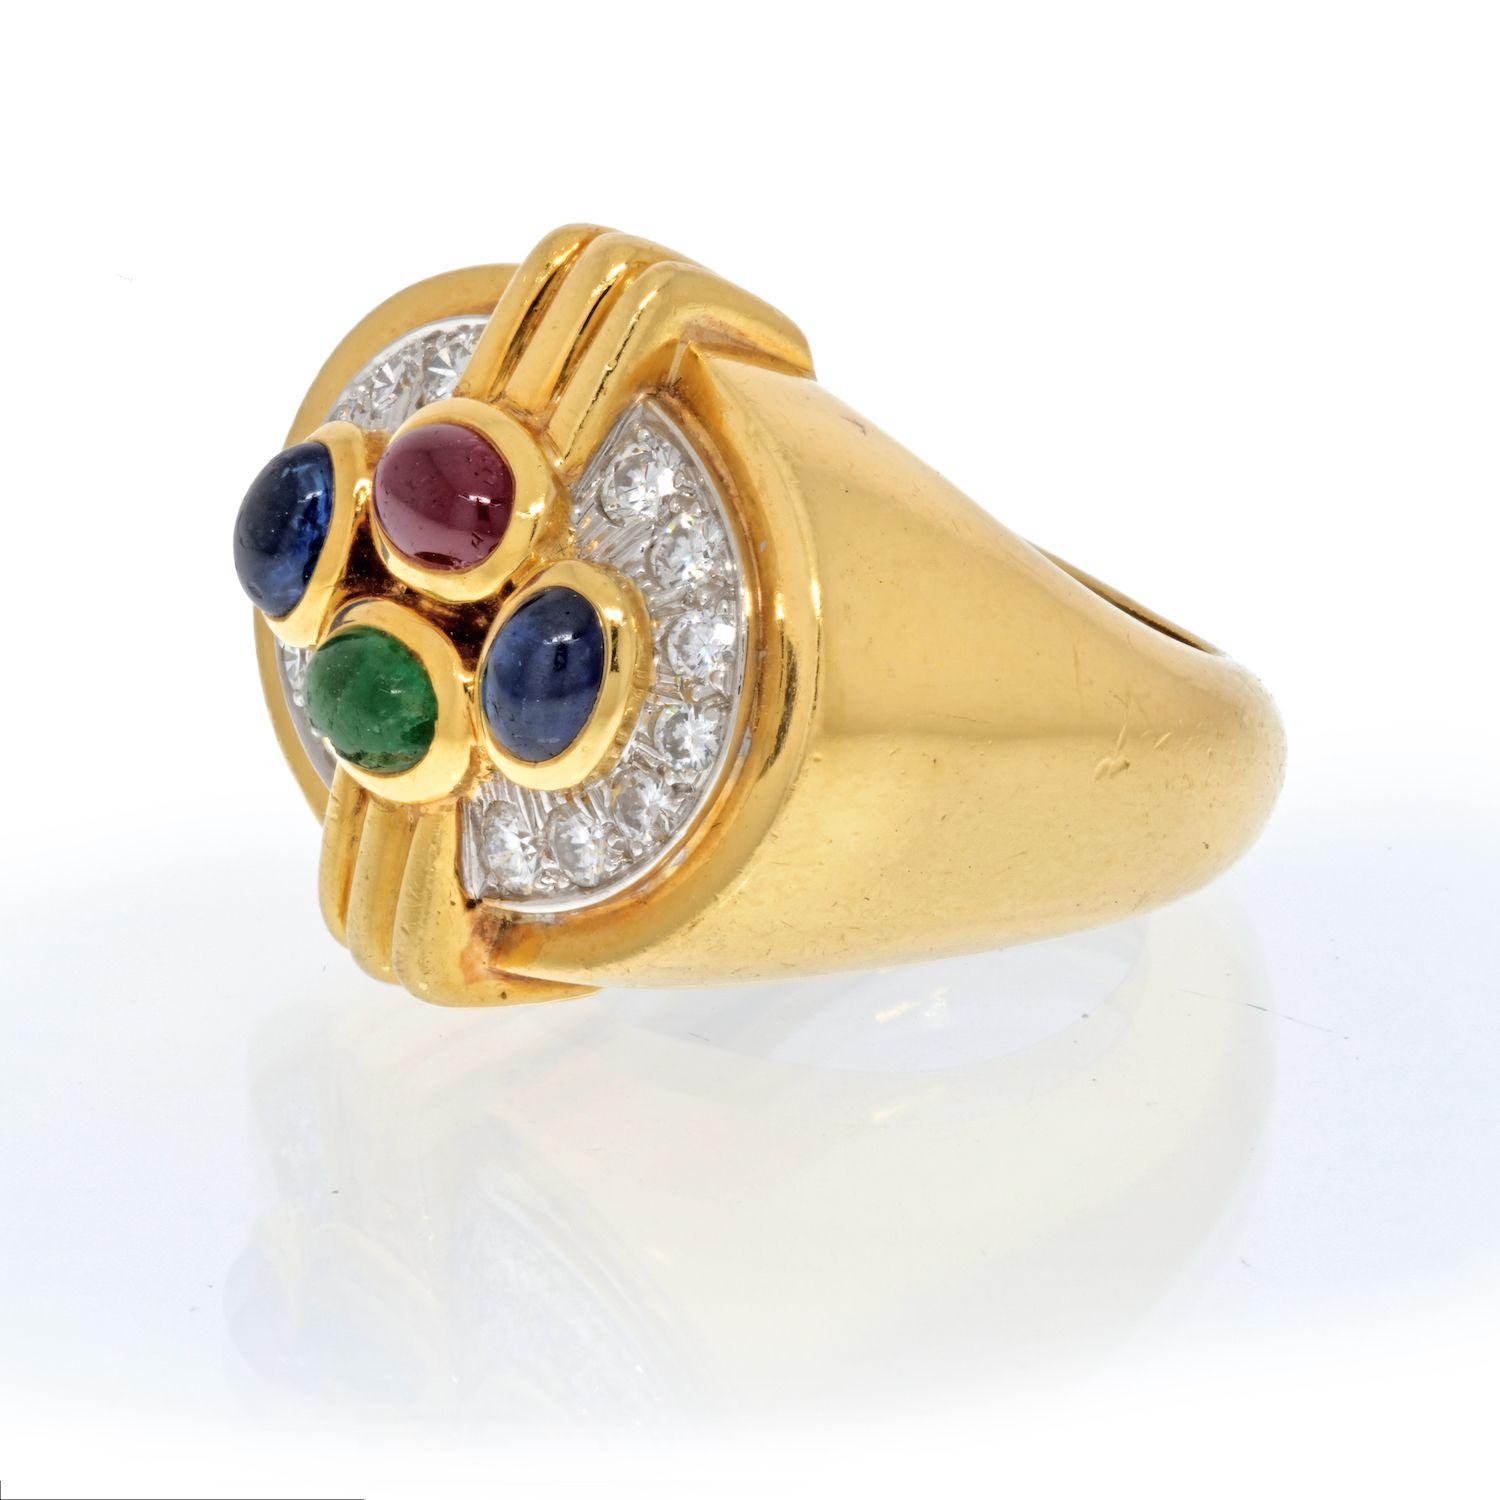 Bright and exciting this David Webb Multi Color Gemstone And Diamond Ring is in great condition and comes as a part of a ring and earrings set. Mounted with cabochon rubies, sapphires and an emerald, paved with round cut diamonds.
Width accorss